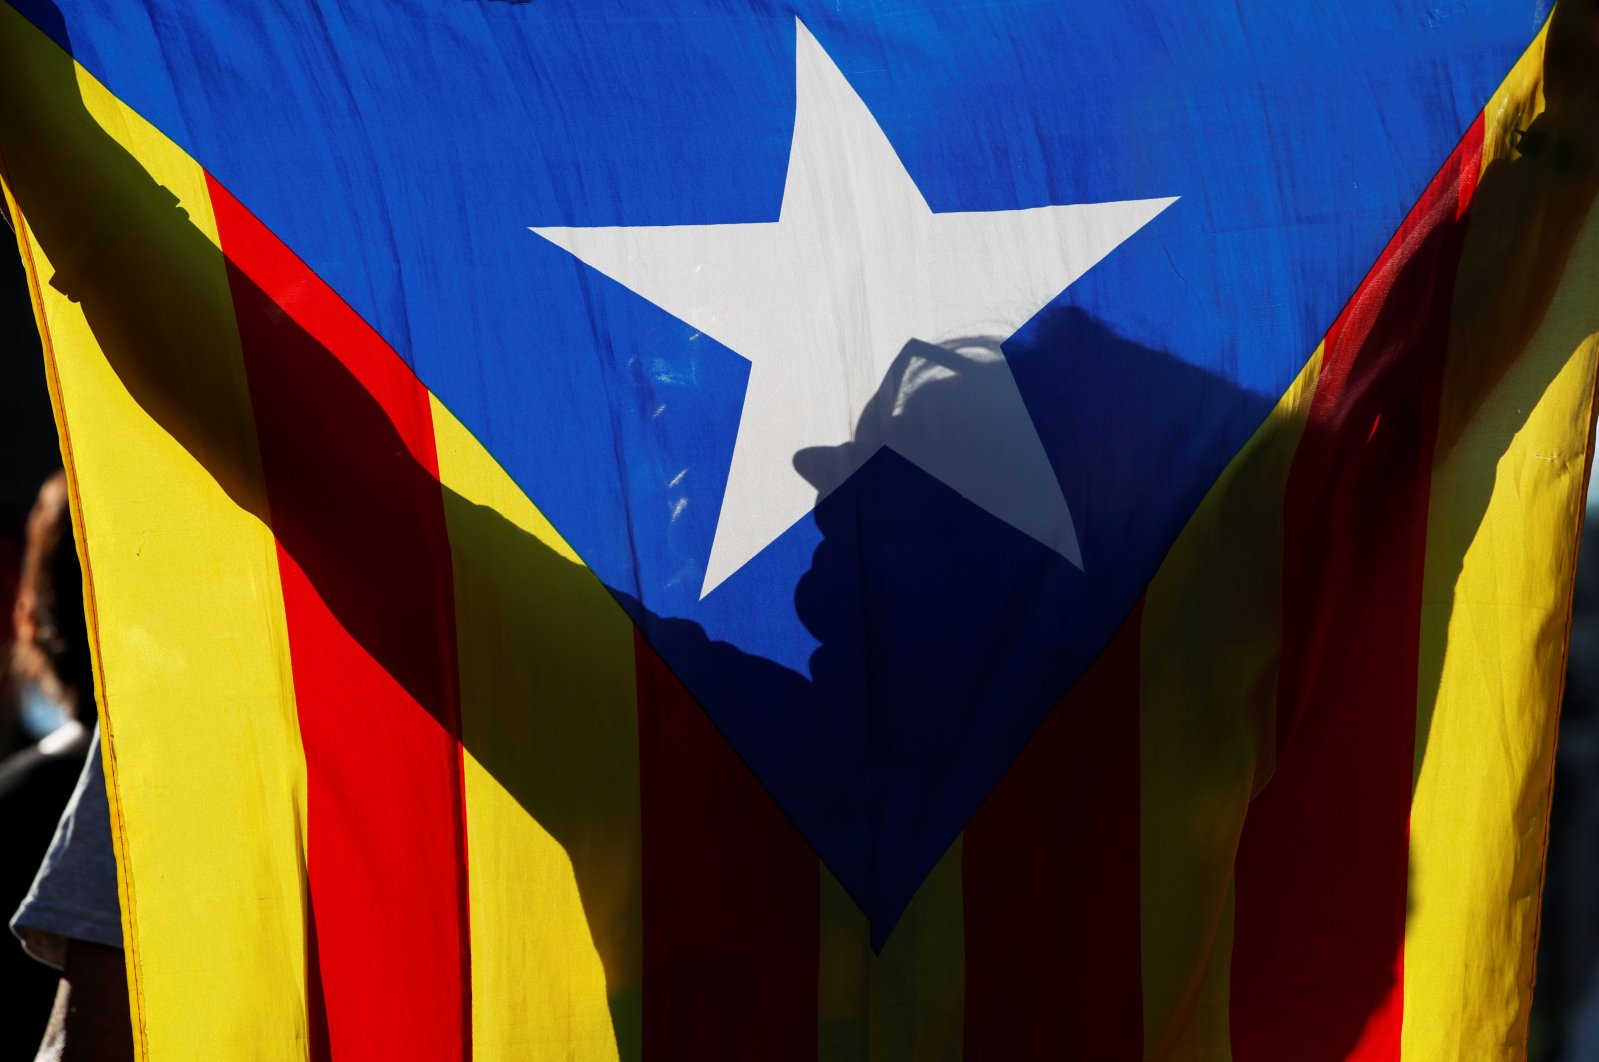 A woman is silhouetted in an Estelada flag (the Catalan pro-independence flag) during a protest called by separatist Committee for the Defense of the Republic (CDR) against Spain's King Felipe VI visit at the Mobile World Congress inaugural dinner, in Barcelona, Spain, June 27, 2021. (Reuters Photo)